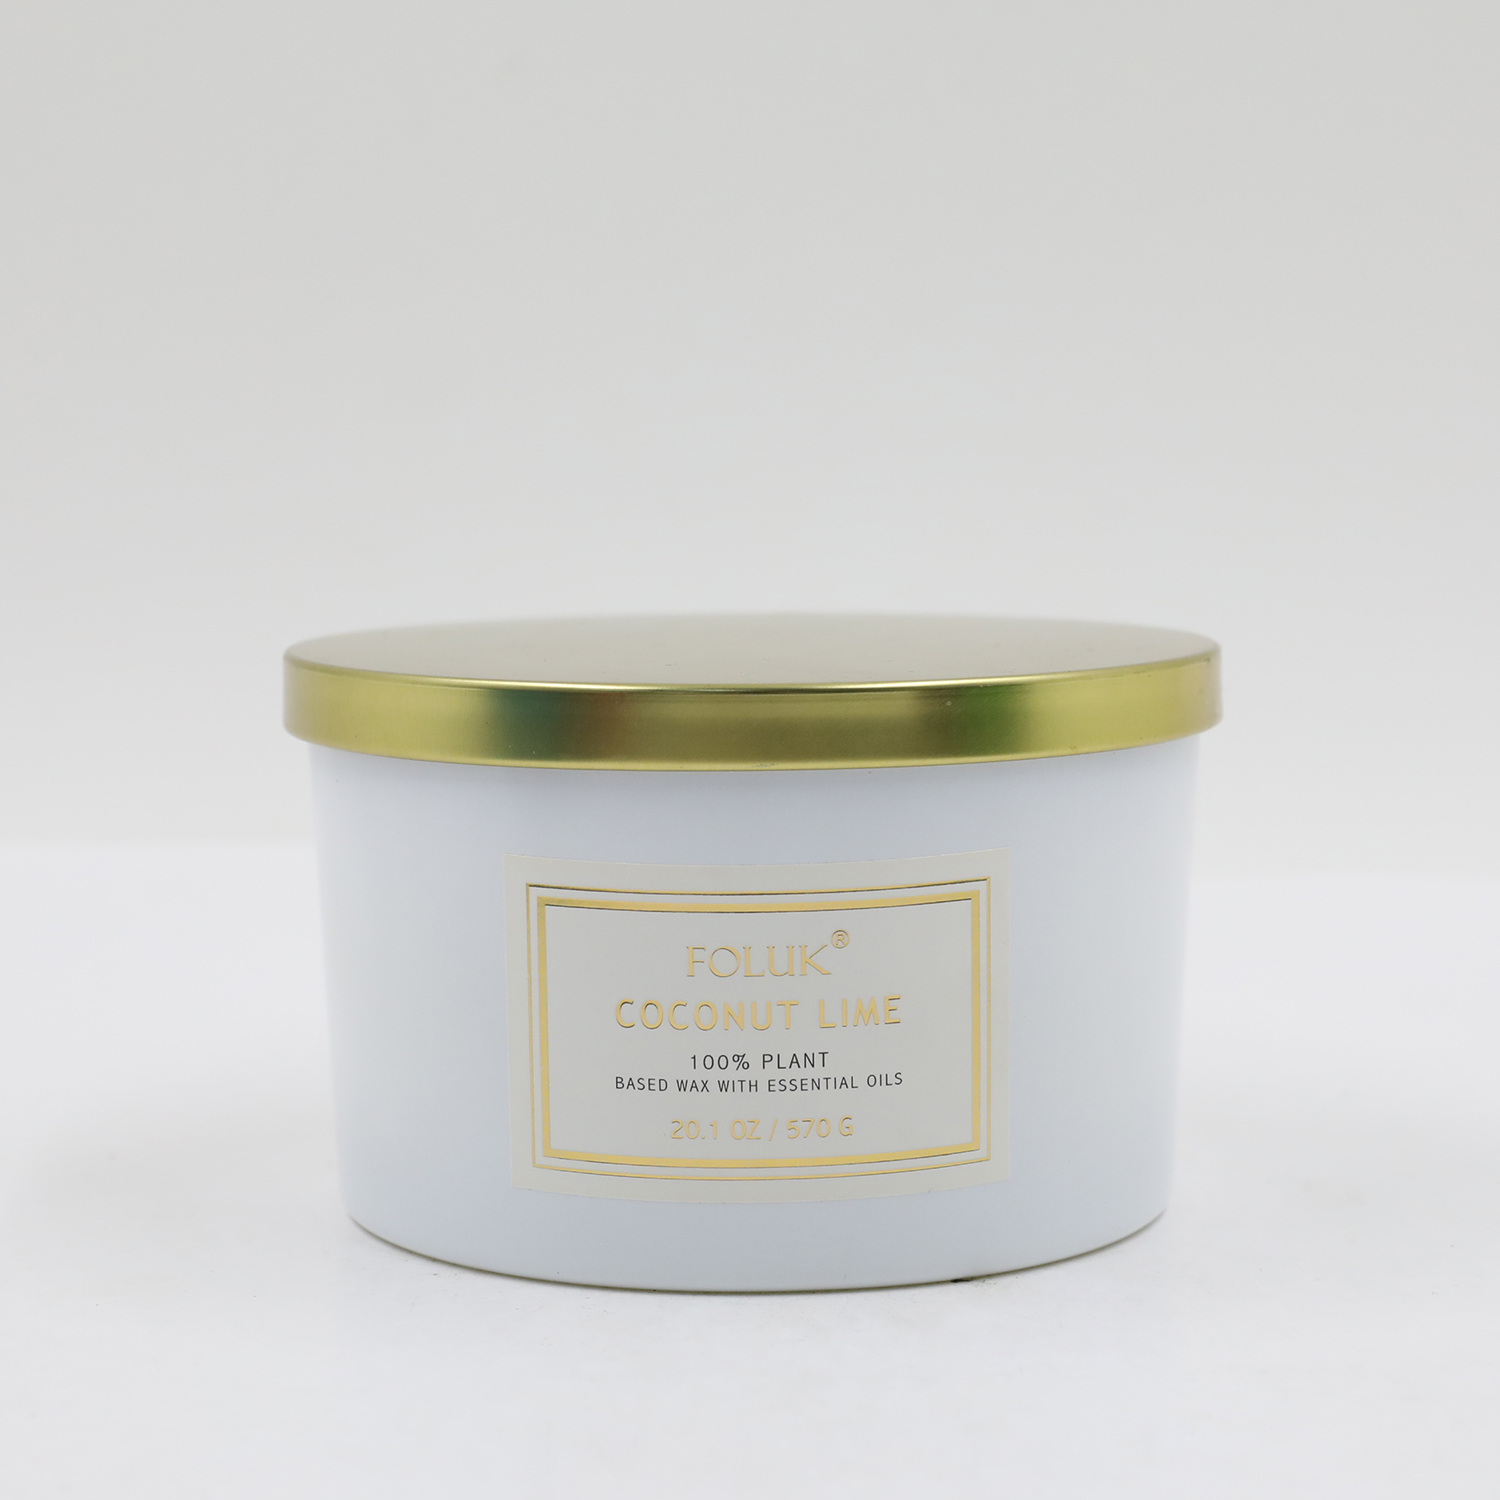 FOLUK 18.3oz Coconut Lime Scented 3-Wick Candle